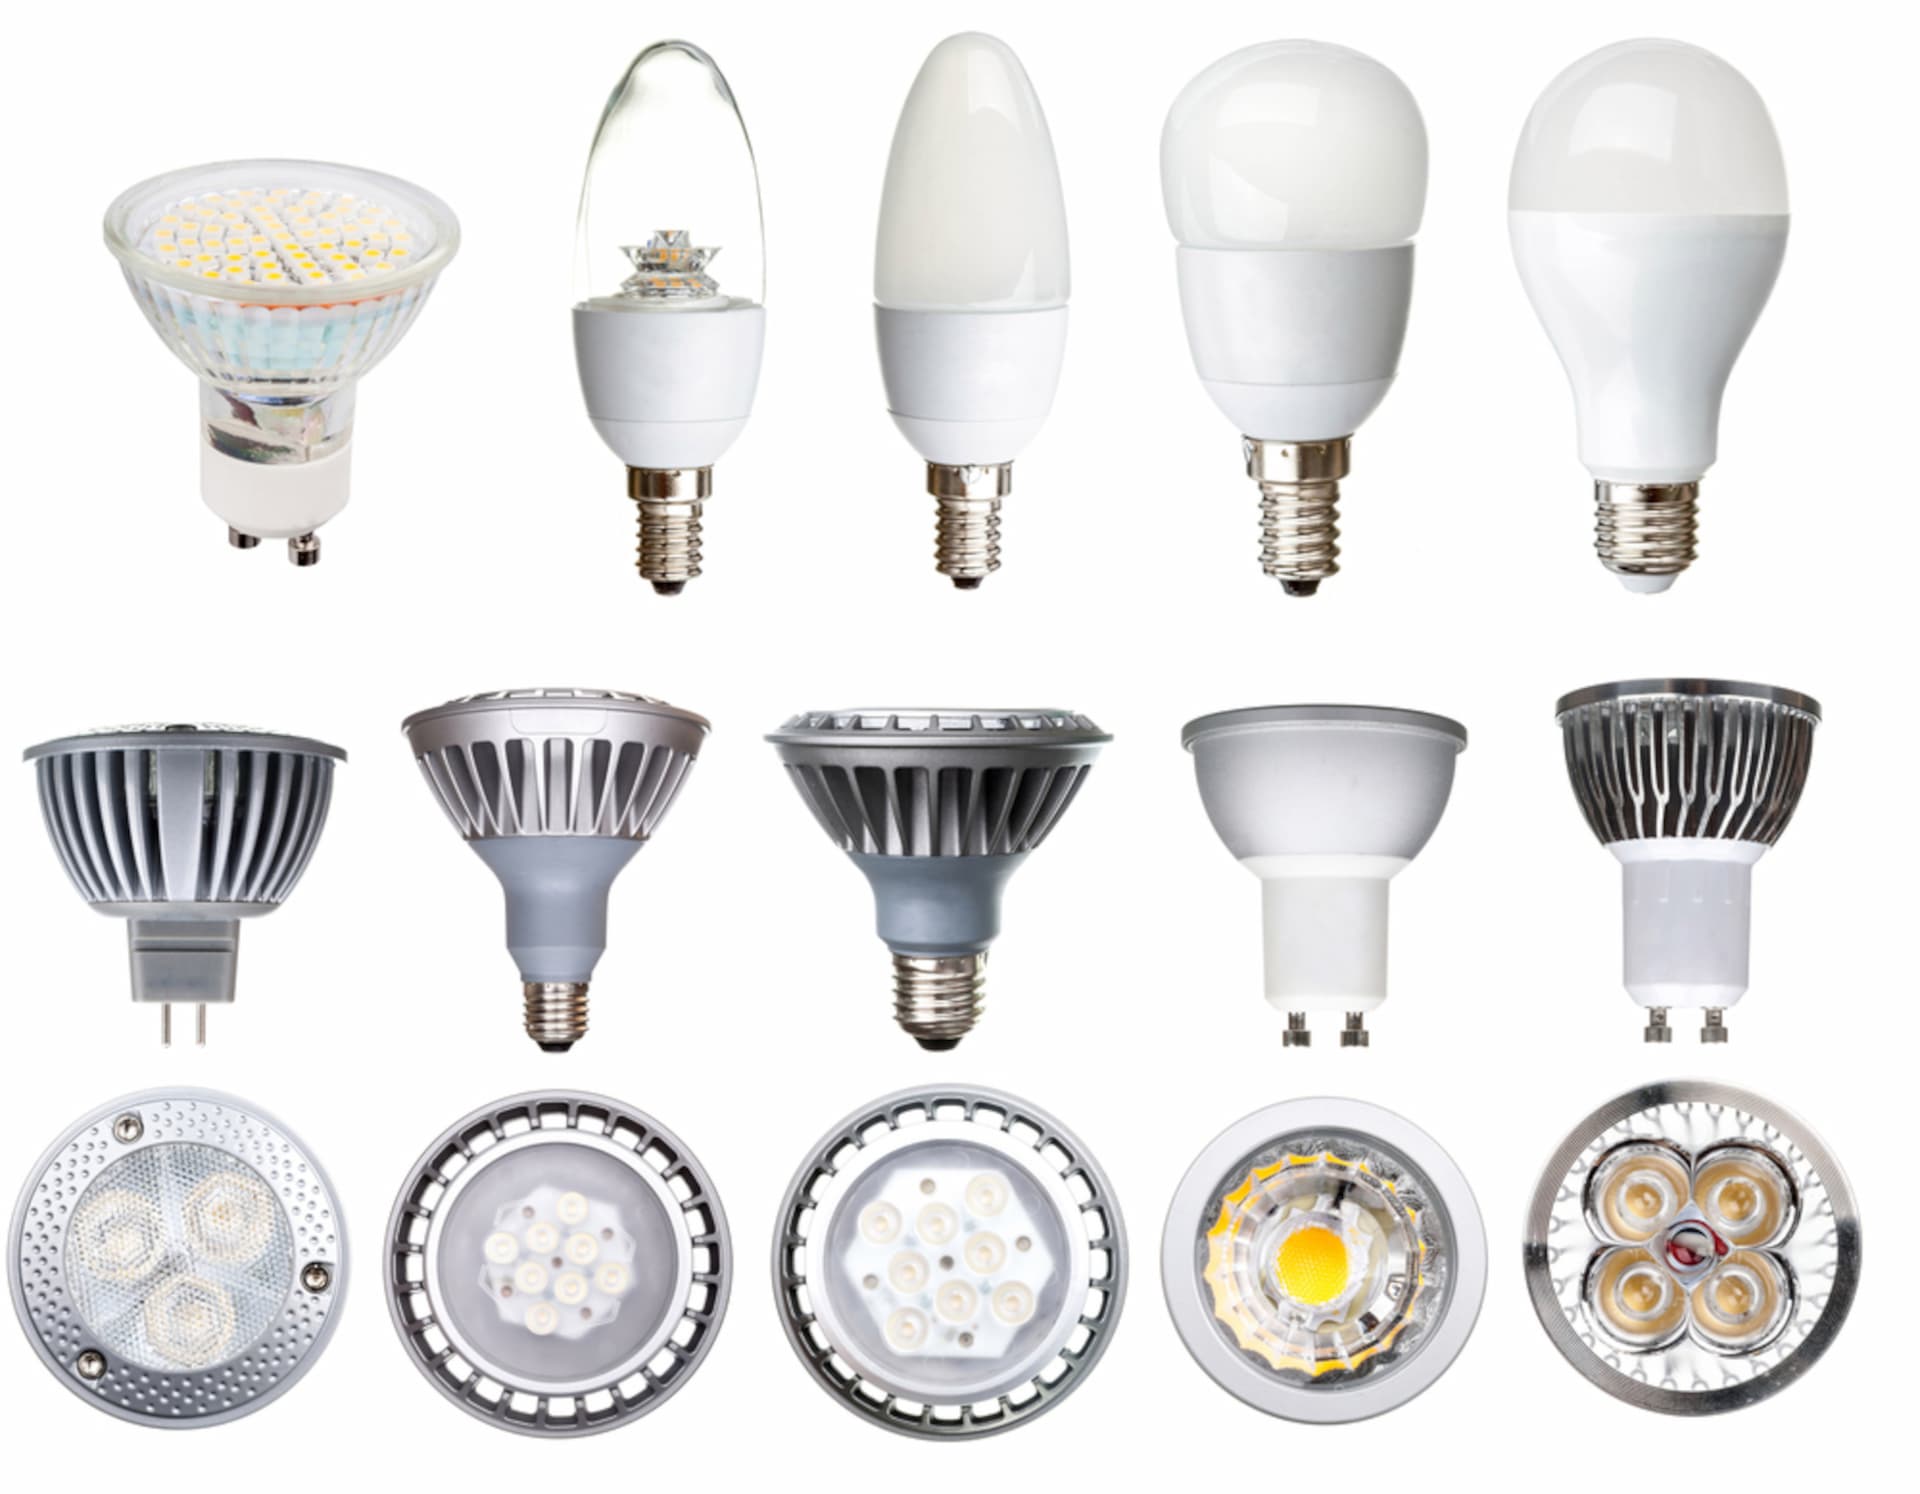 Bulb Types and Bases